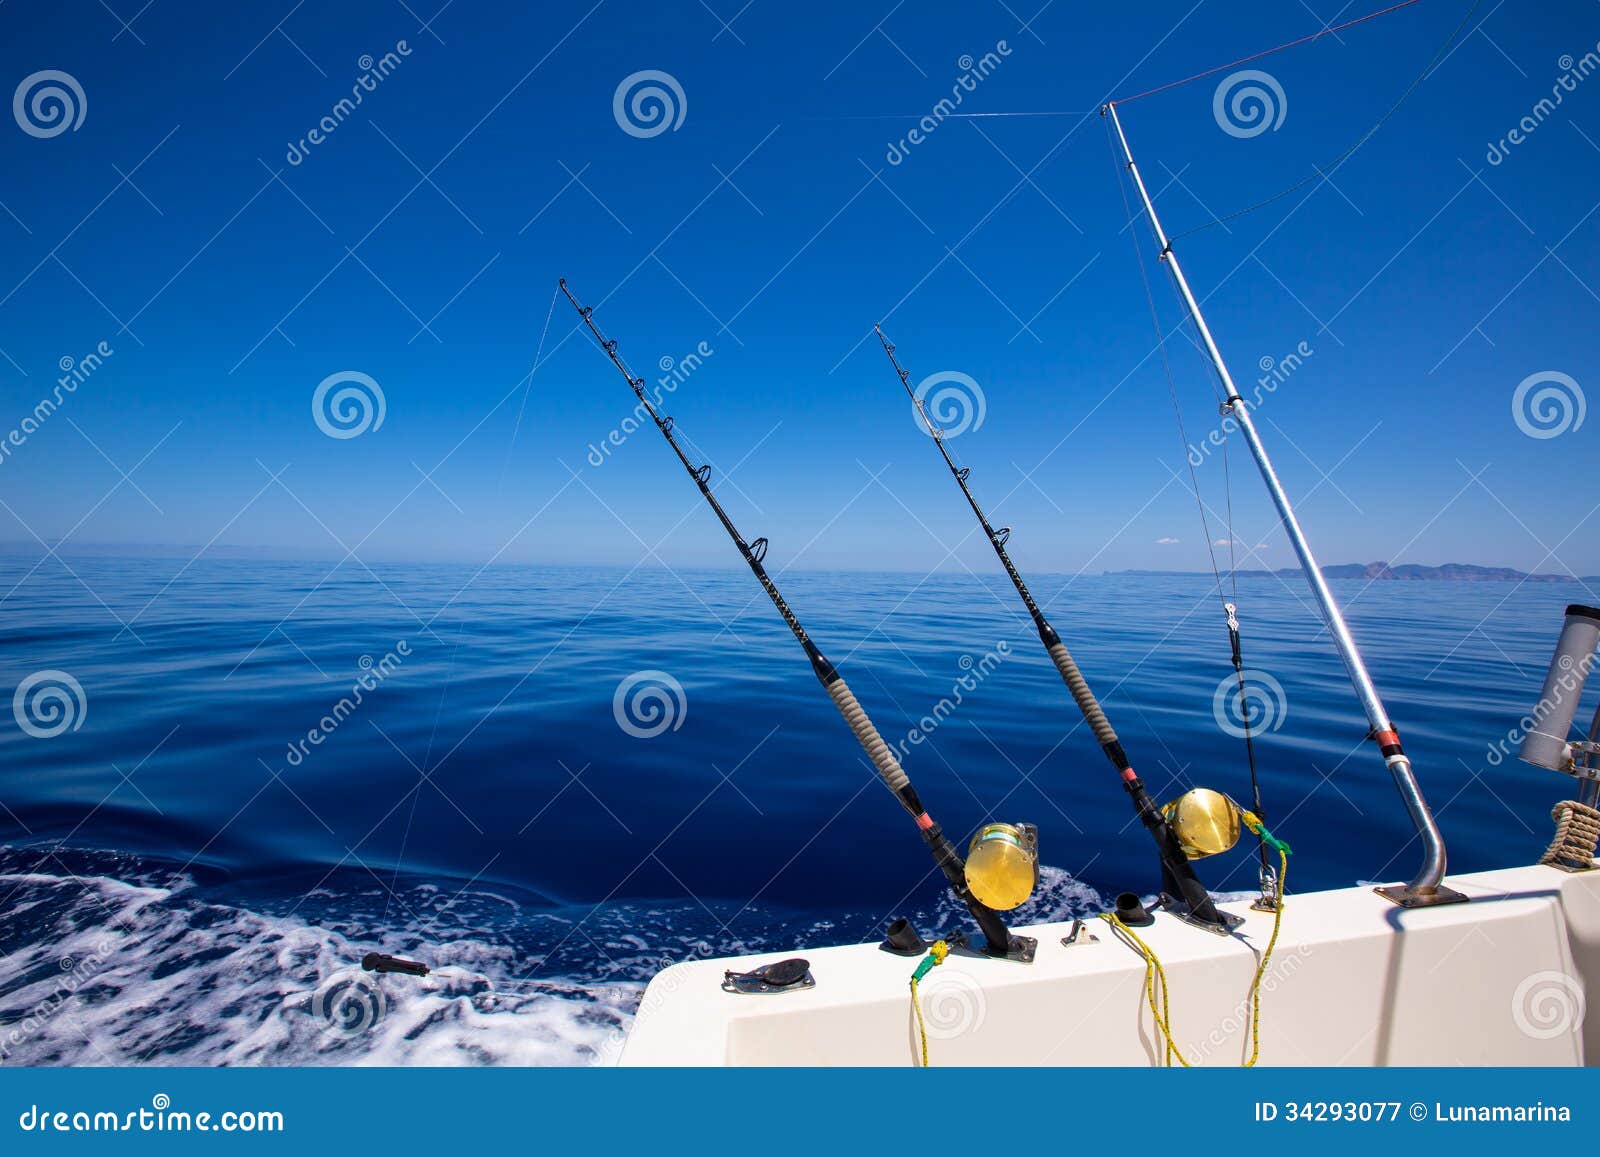 Ibiza Fishing Boat Trolling Rods and Reels in Blue Sea Stock Image - Image  of deck, charter: 34293077